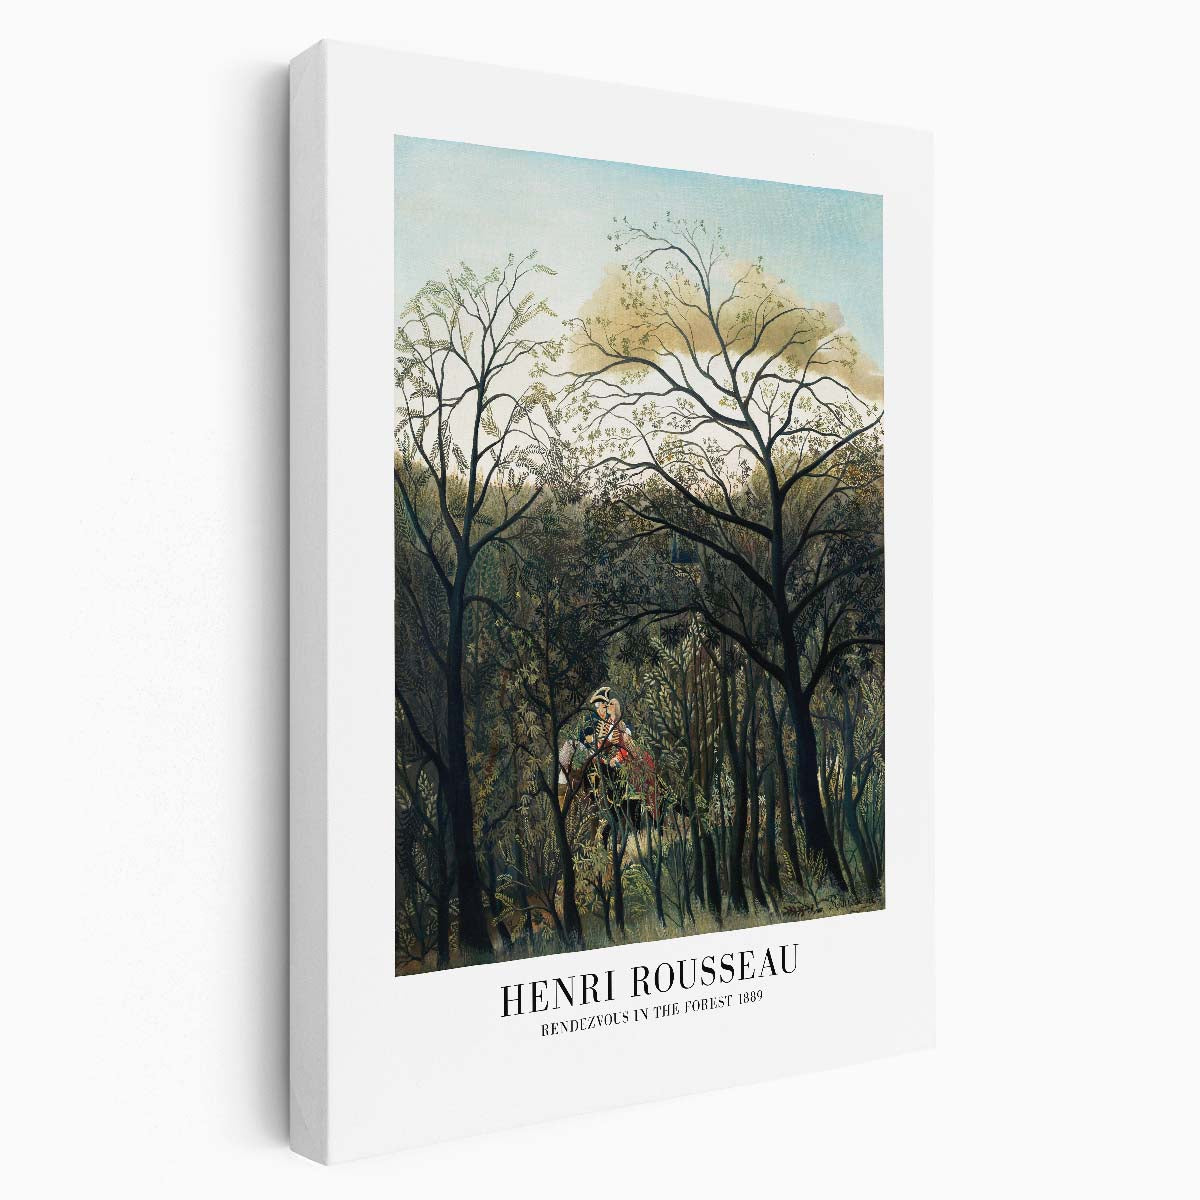 Romantic Forest Rendezvous - Acrylic Illustration by Master Artist Henri Rousseau by Luxuriance Designs, made in USA